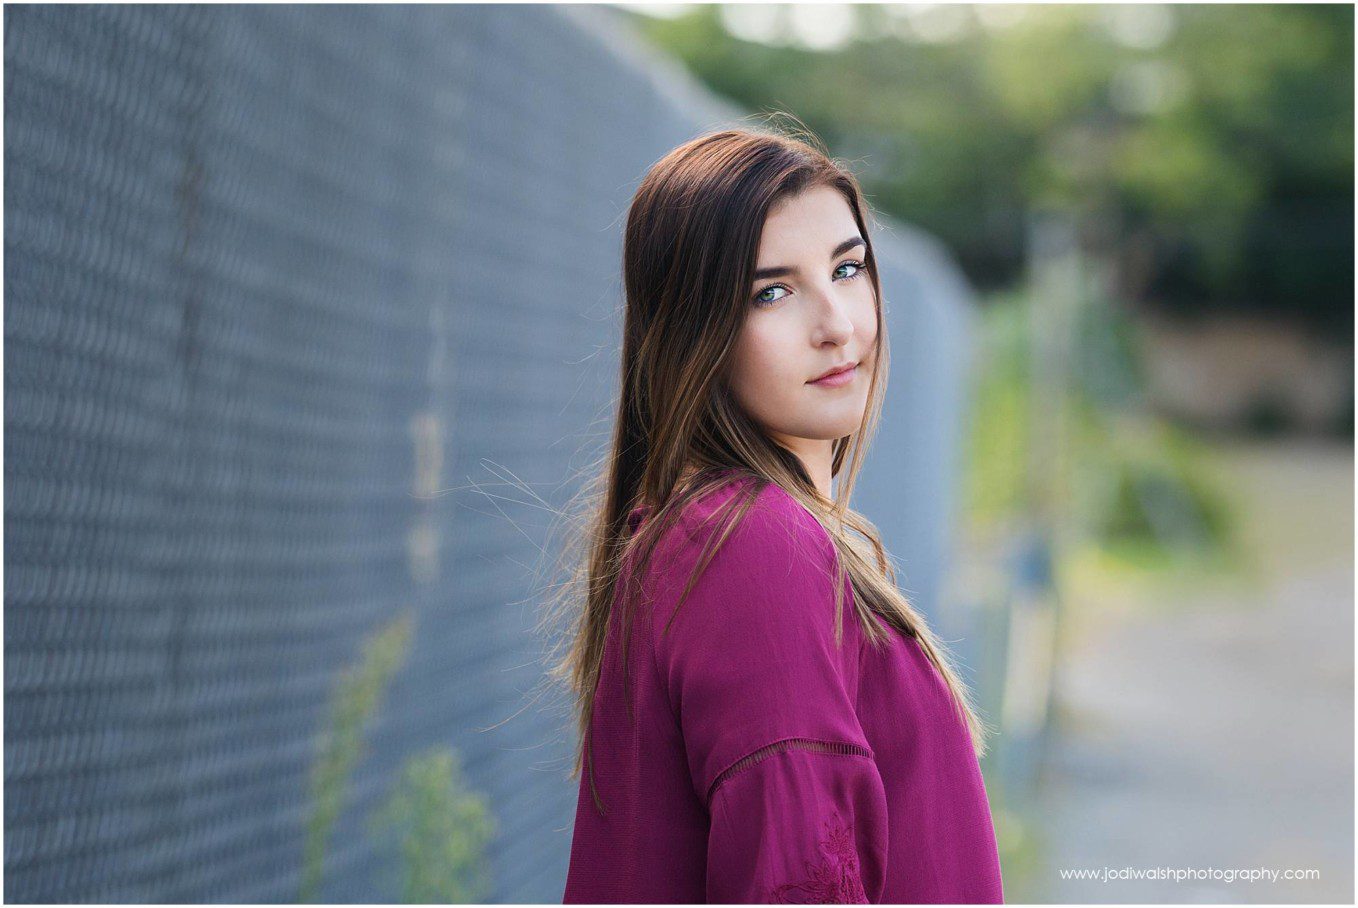 image of a senior girl with dark hair wearing a magenta shirt looking back over her right shoulder. example of Senior portrait image with Jodi Walsh Photography